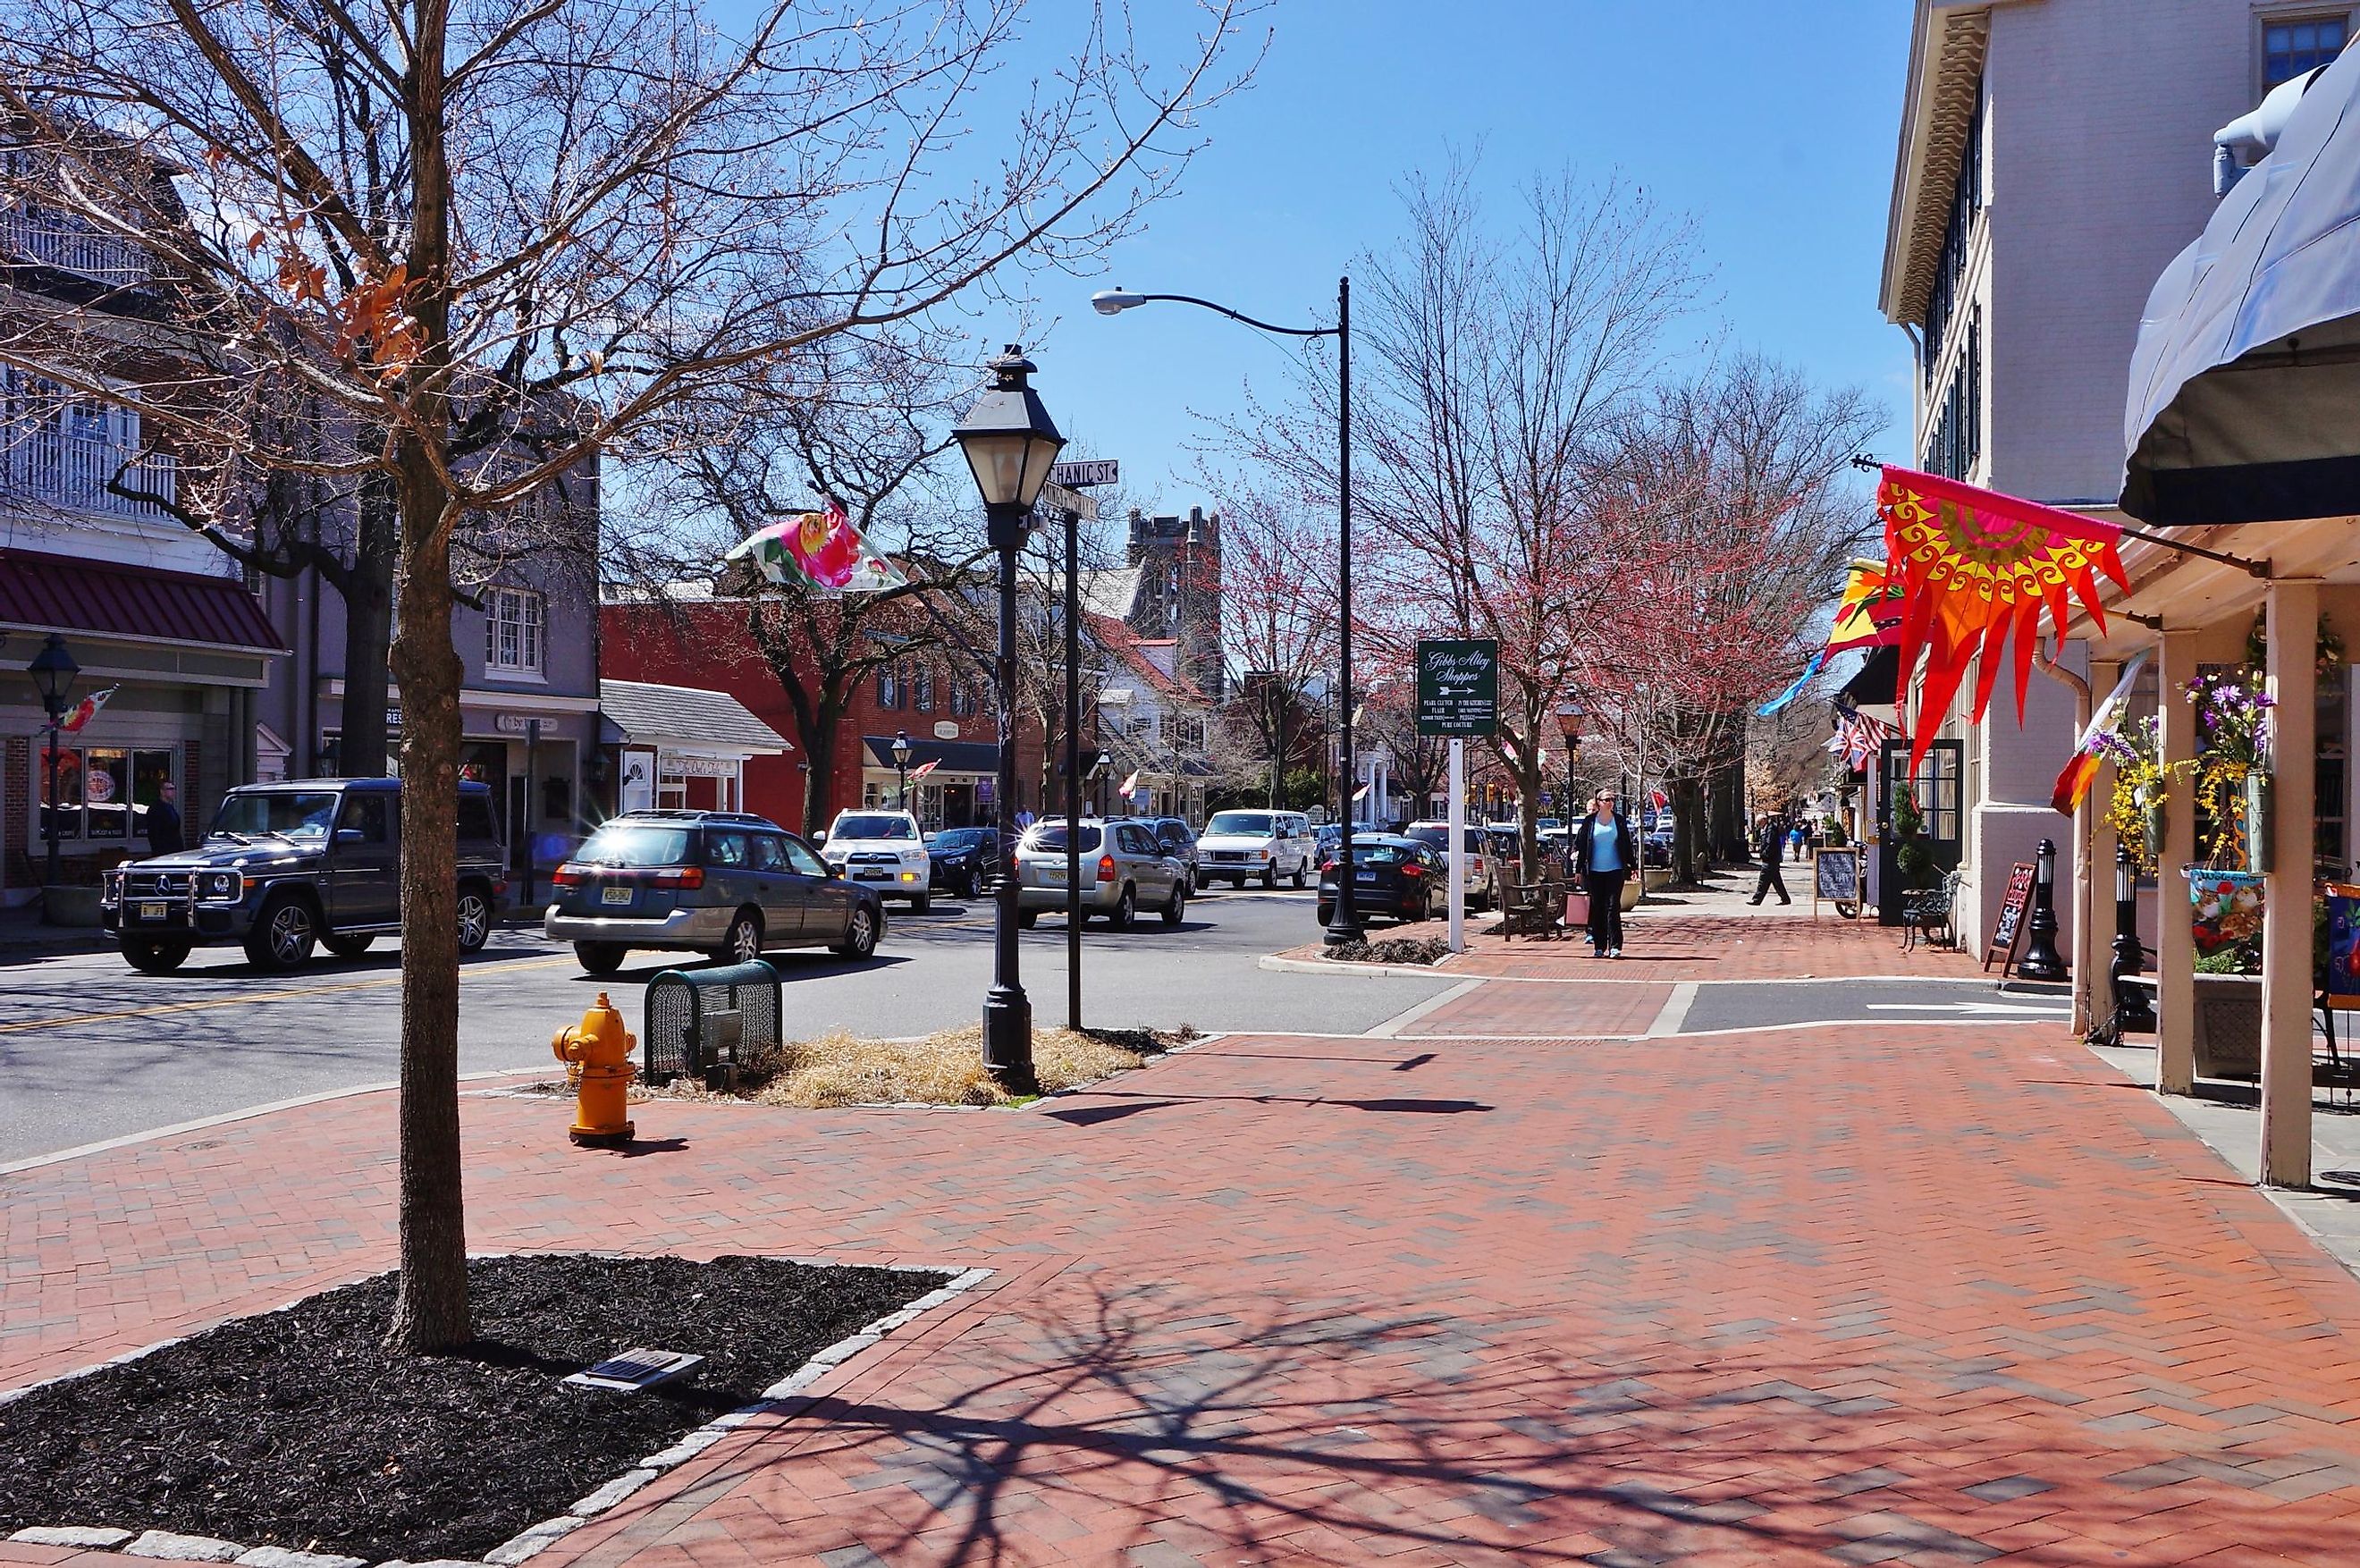 The historic town of Haddonfield in New Jersey. Editorial credit: EQRoy / Shutterstock.com